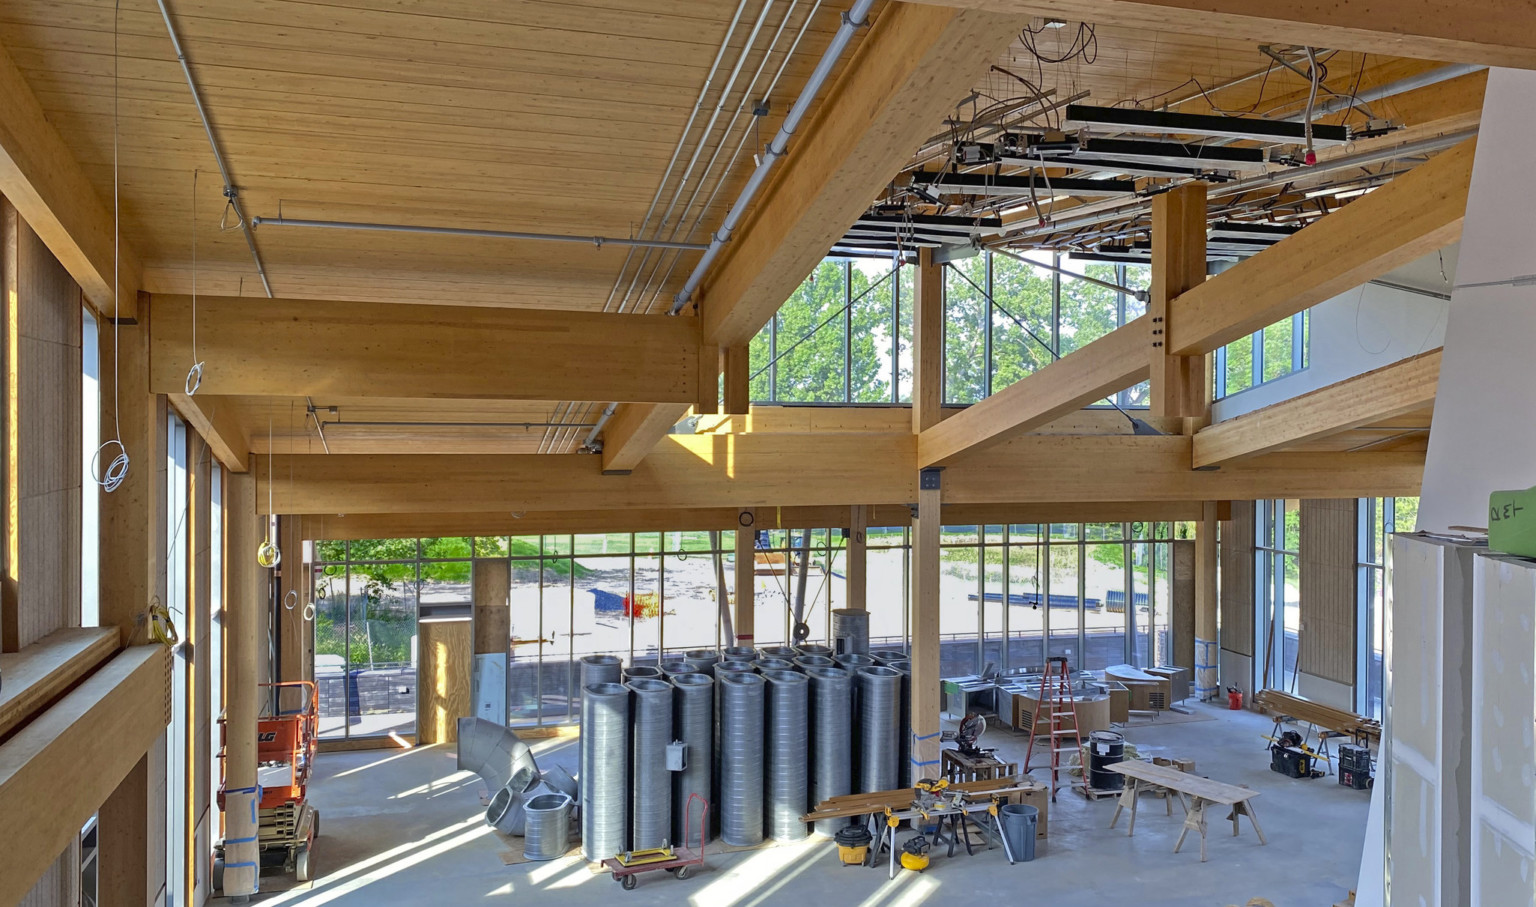 Dining commons interior under construction looking from upper level. Mass timber walls and ceiling, equipment and large windows